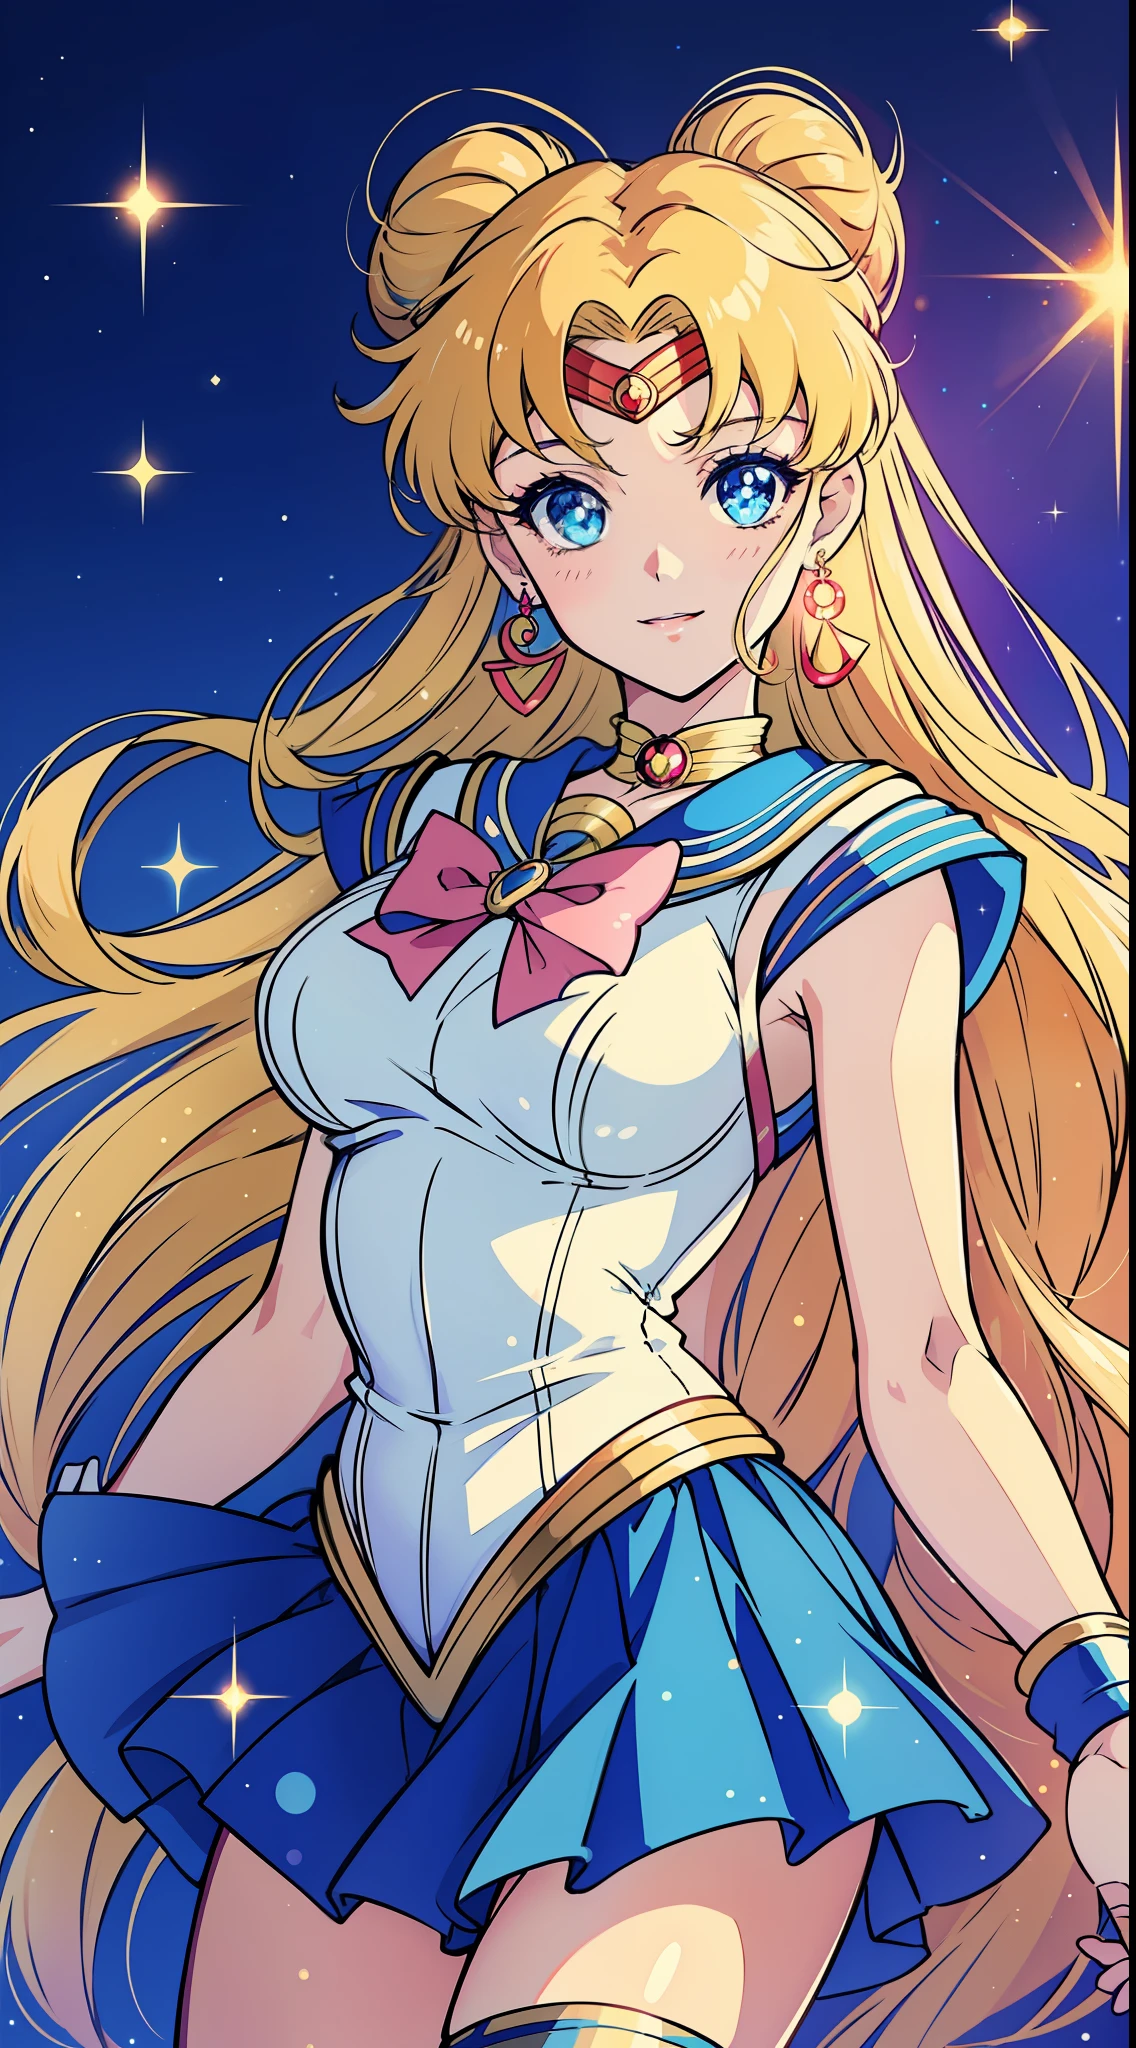 Girl, Solo:
Style: Anime (Sailor Moon)
Quality: Graceful
Quality: Compassionate
Hair: Long, flowing hair in a vibrant shade of blonde, with two cute buns on top
Eye Color: Large, sparkling blue eyes
Outfit: Wearing the iconic Sailor Moon uniform, consisting of a white leotard with a blue sailor collar, a pleated blue skirt, and a large red bow on her chest
Accessories: Adorned with a tiara on her forehead, matching blue earrings, and white elbow-length gloves
Pose: Standing tall with one hand resting on her hip, while the other holds a magical wand, which emits a soft, sparkling glow
Expression: Her gaze is gentle and compassionate, with a light, serene smile on her lips